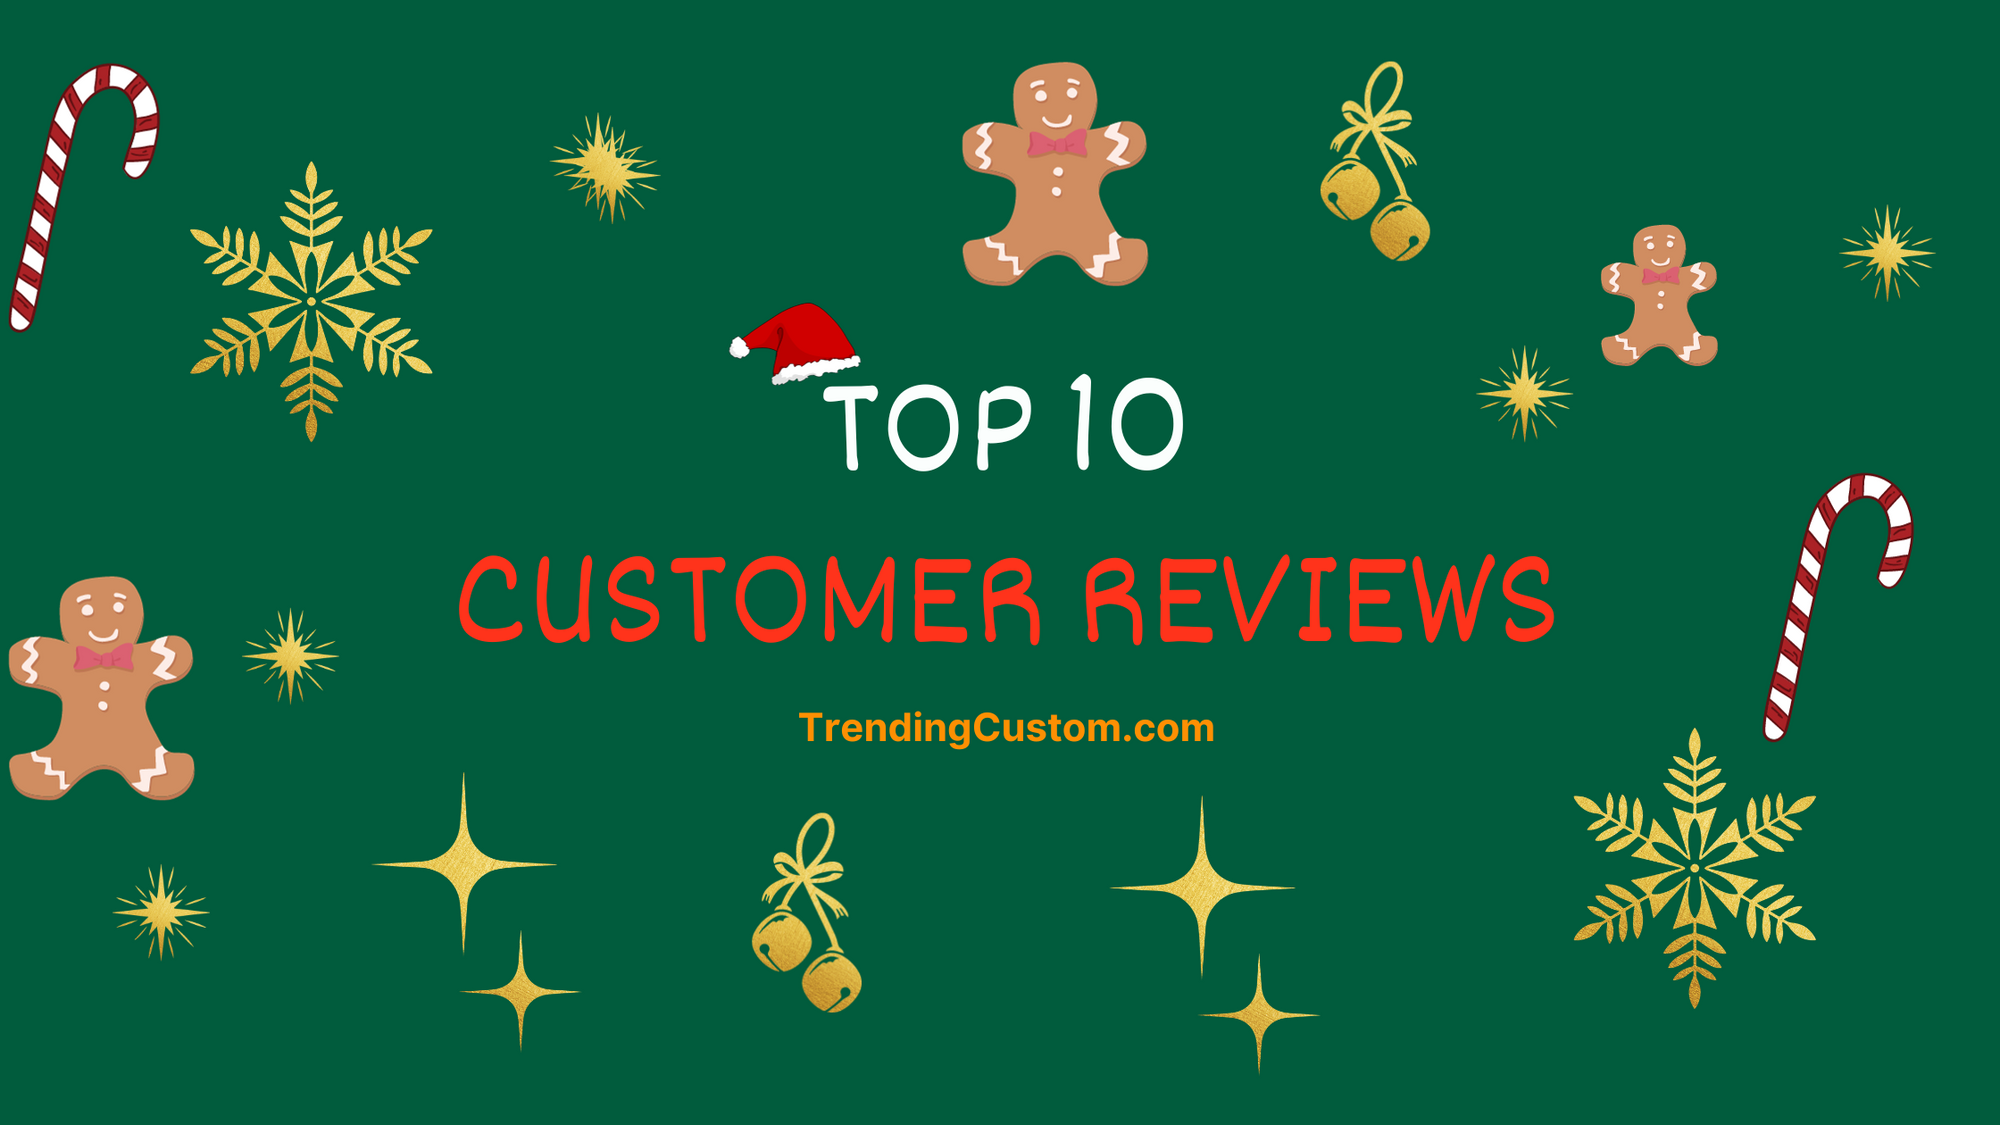 Top 10 Raving Reviews: Our Customers Speak Out! - December 24th